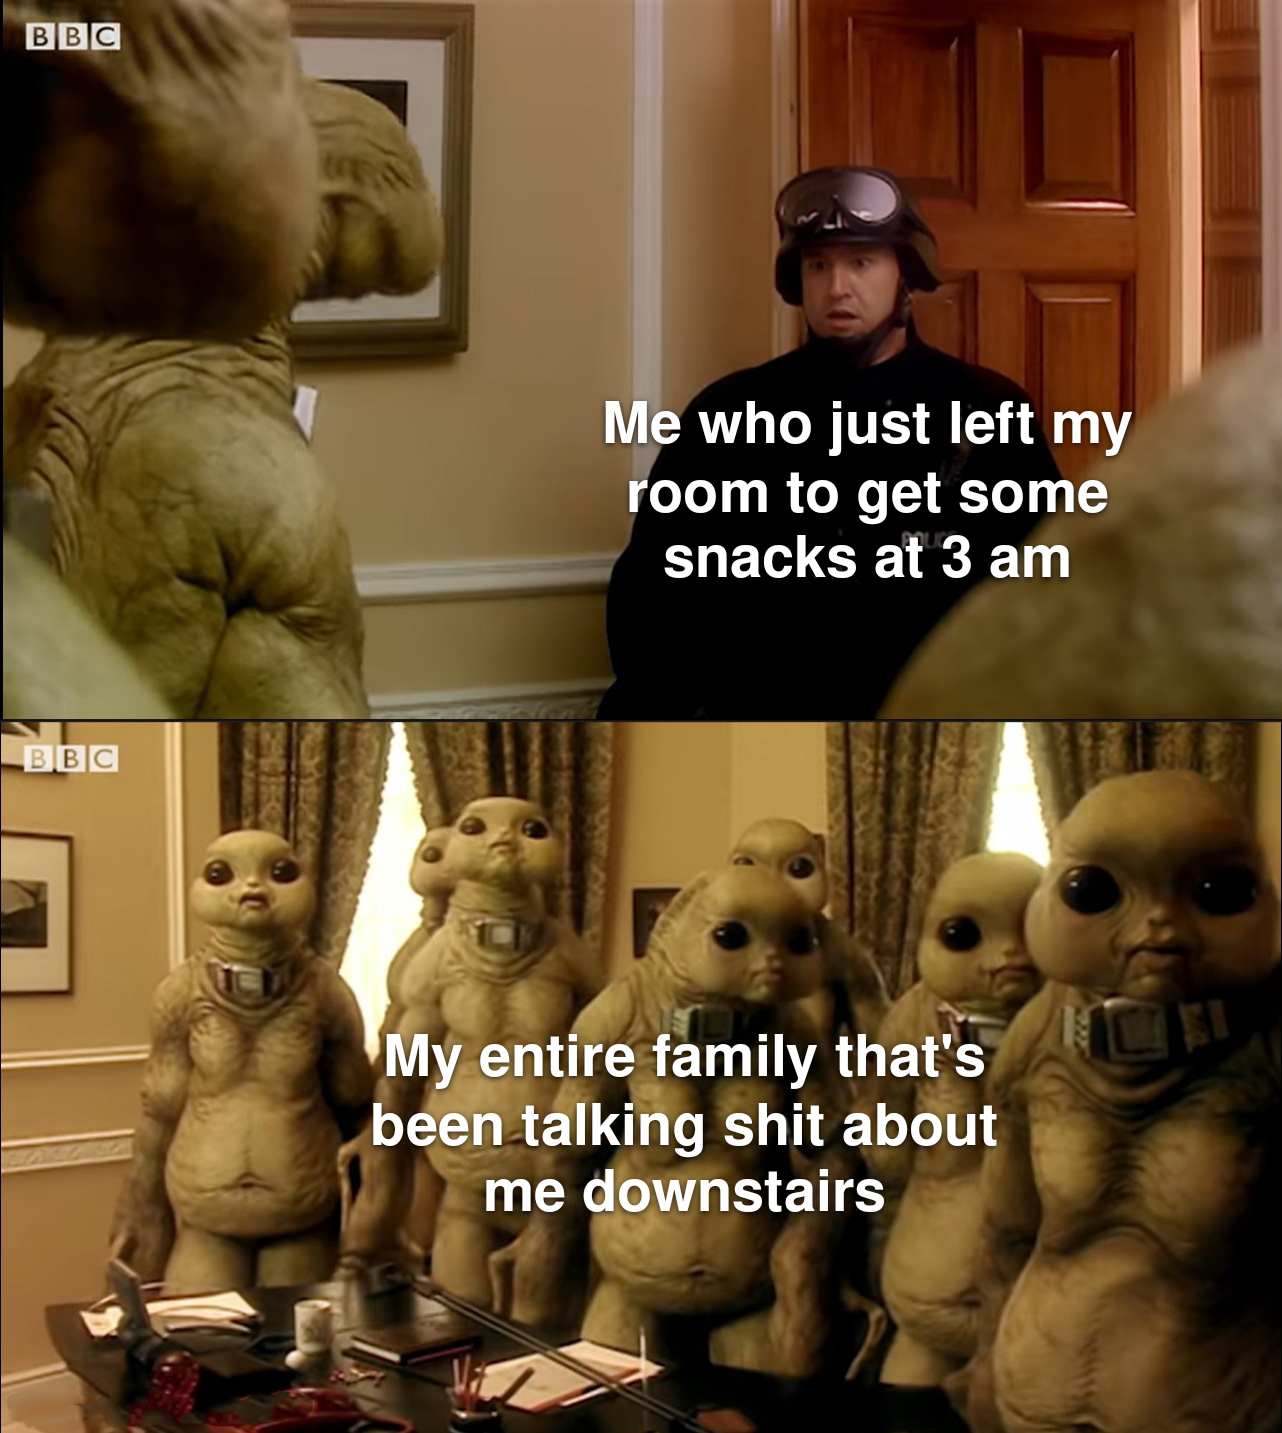 funny memes and pics - photo caption - Bbc Bbc Me who just left my room to get some snacks at 3 am My entire family that's been talking shit about me downstairs